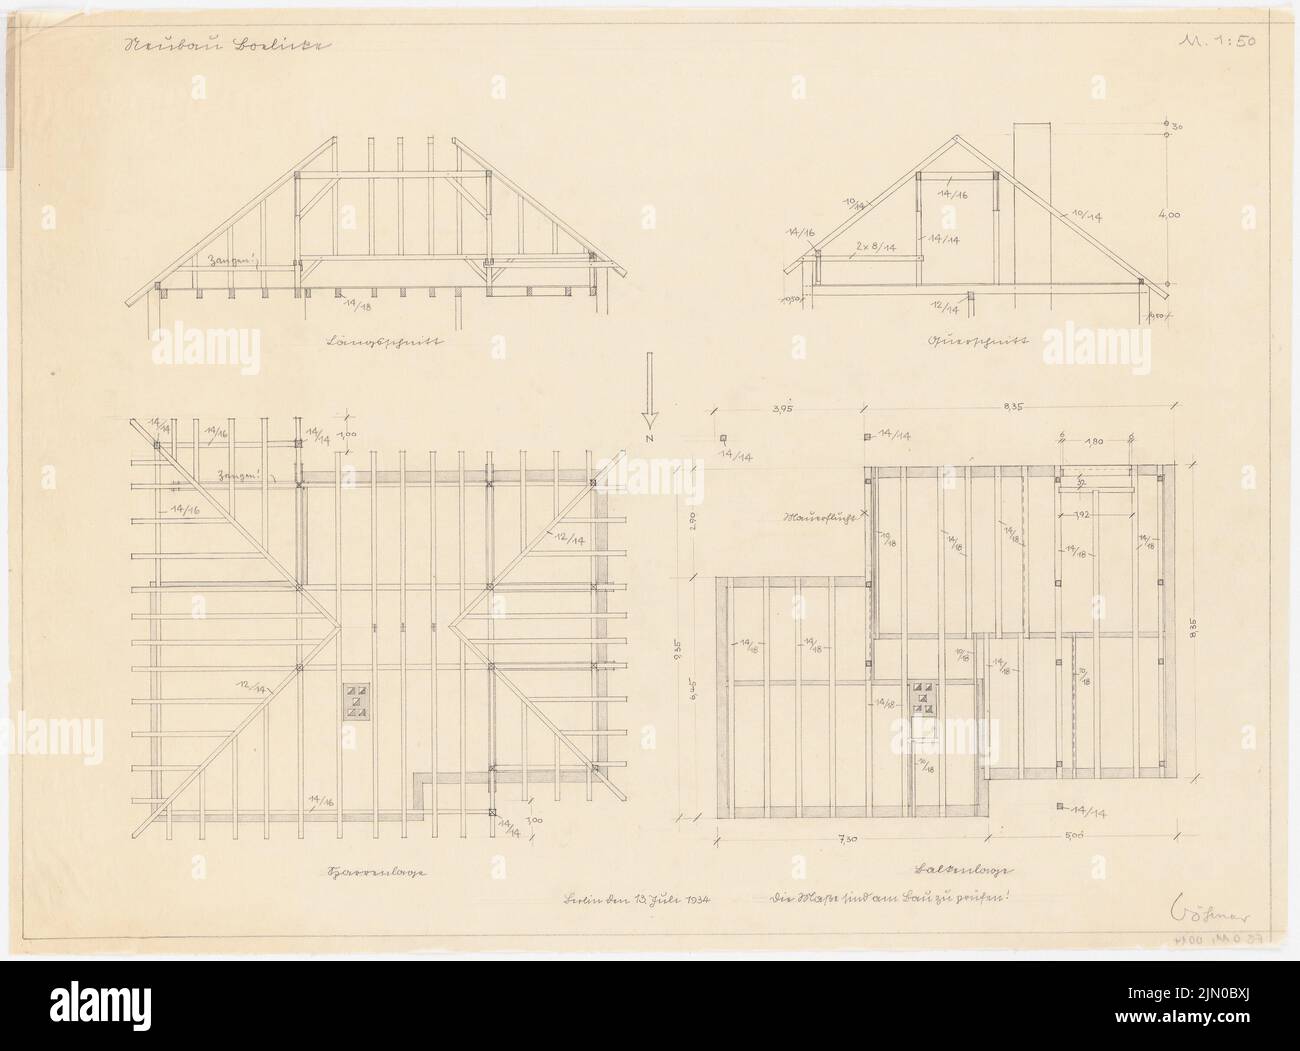 Böhmer Franz (1907-1943), Boelicke residential building in Berlin-Nikolassee (July 13, 1934): roof structure: cross and longitudinal section, supervision of the rafters and beam position 1:50. Pencil on transparent, 51.4 x 69.5 cm (including scan edges) Böhmer & Petrich : Wohnhaus Boelicke, Berlin-Nikolassee Stock Photo